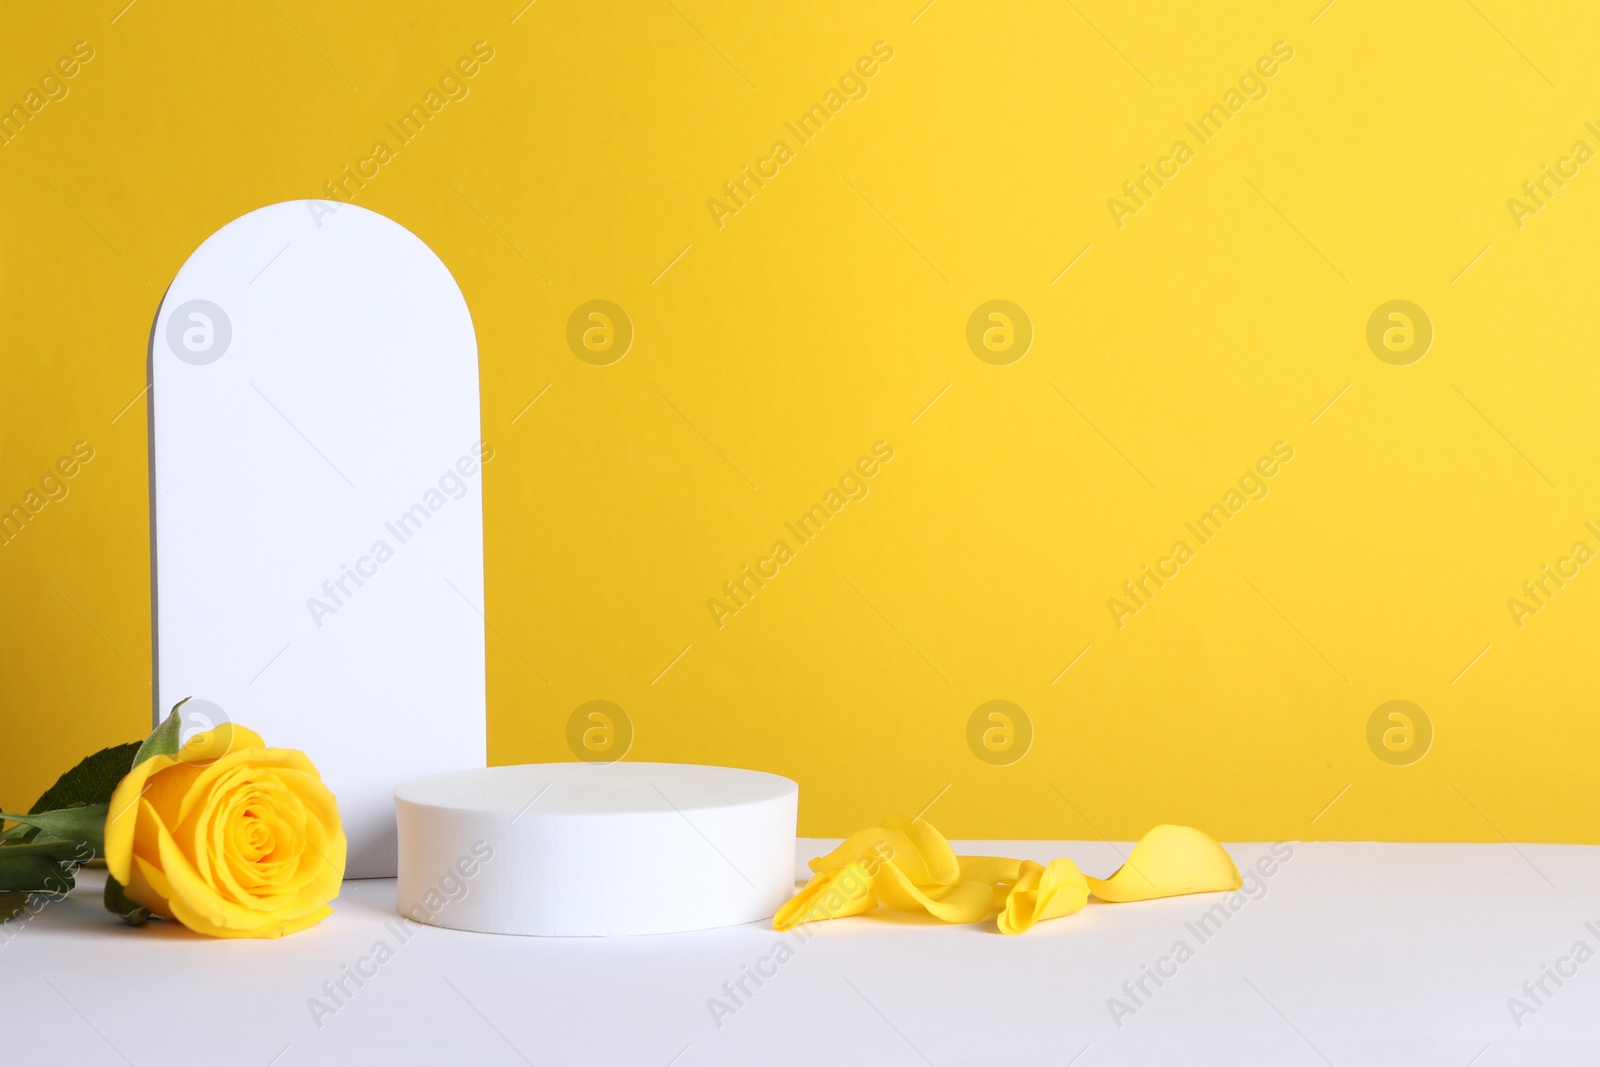 Photo of Beautiful presentation for product. Geometric figures and rose on white table against yellow background, space for text